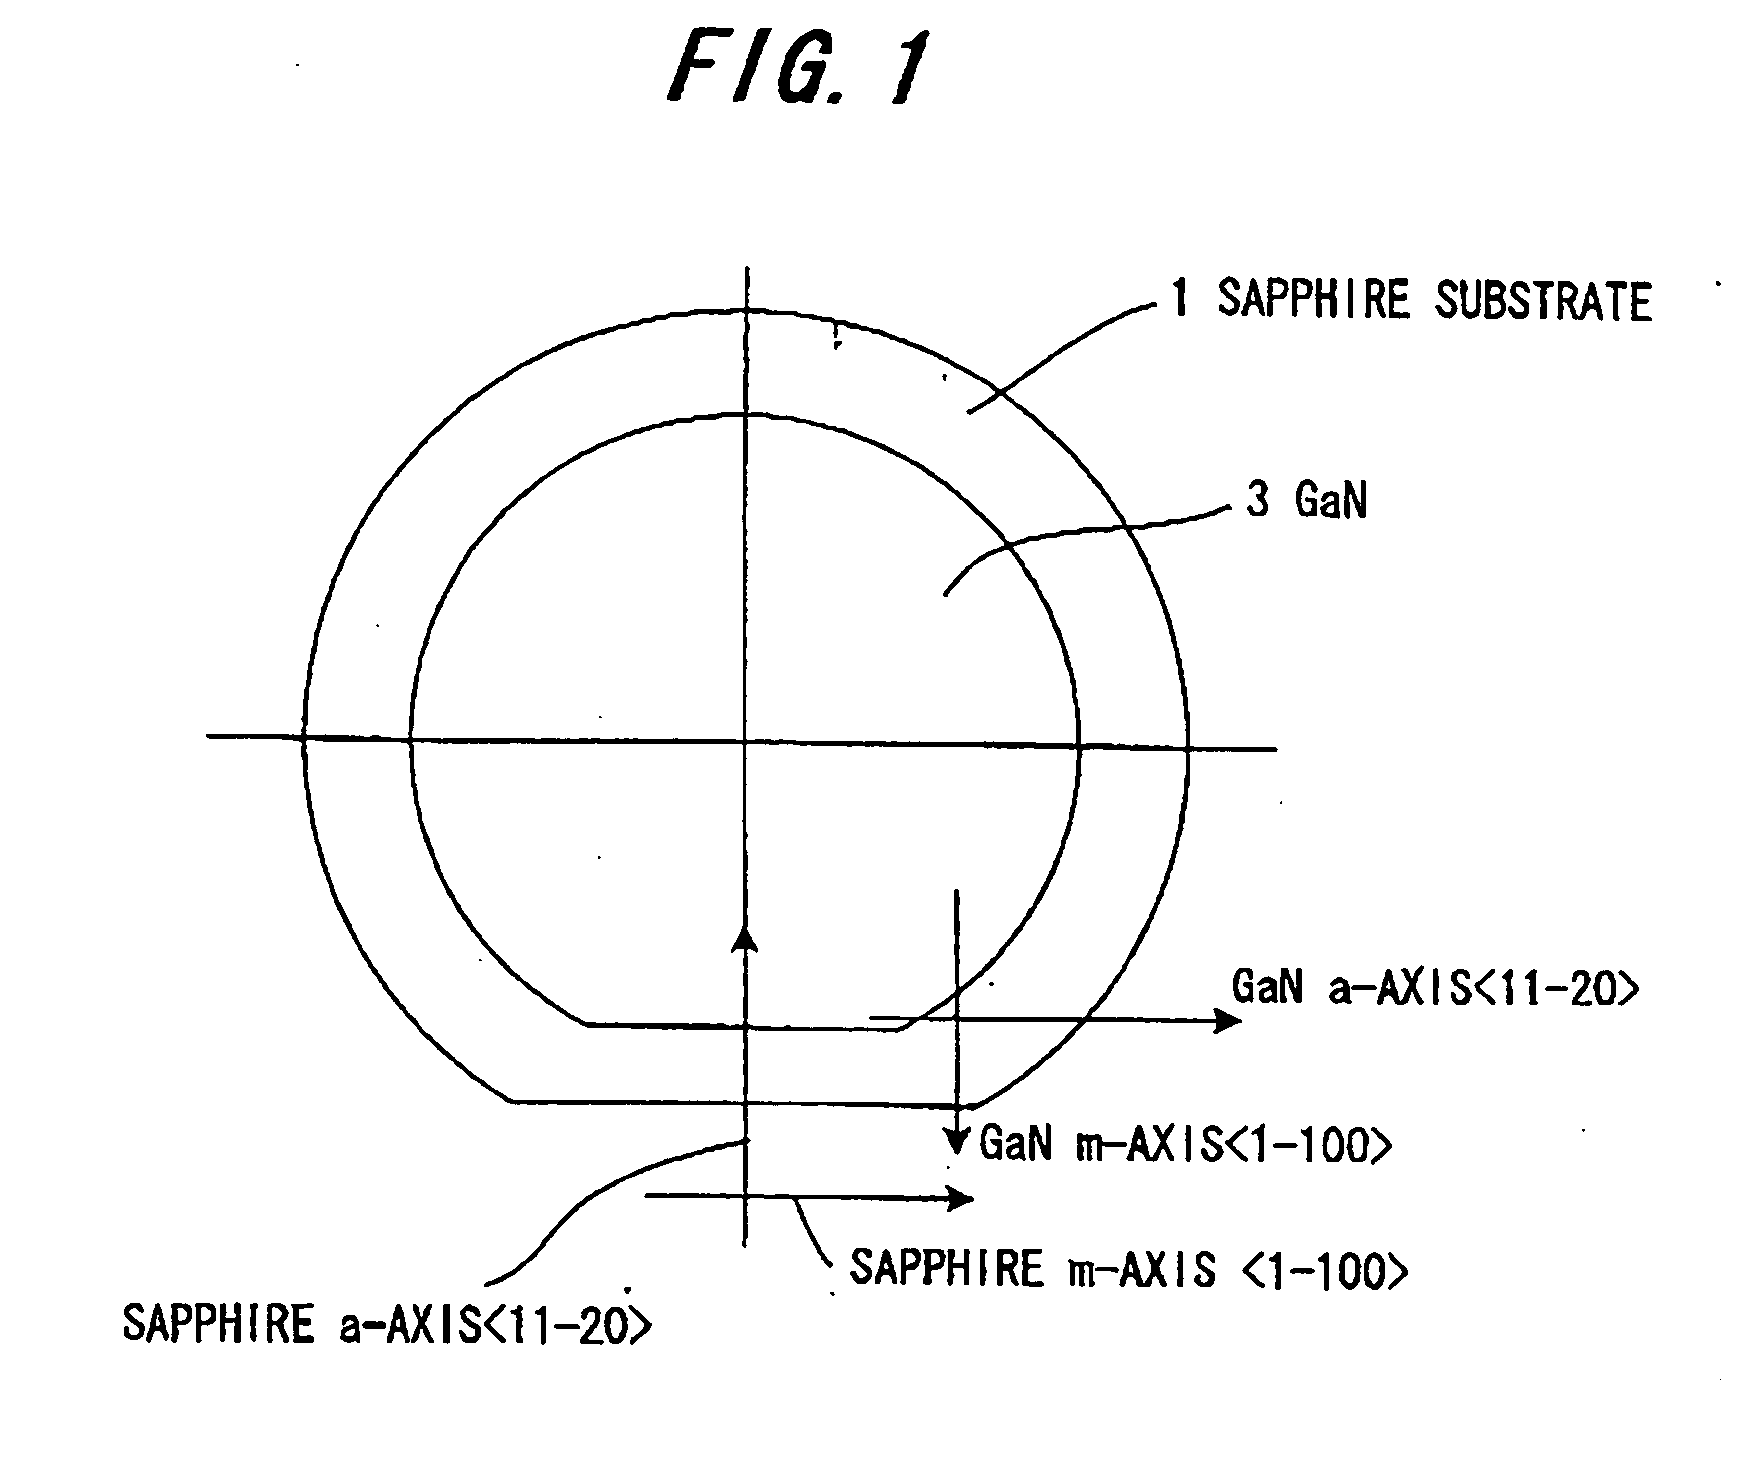 III-V group nitride system semiconductor self-standing substrate, method of making the same and III-V group nitride system semiconductor wafer